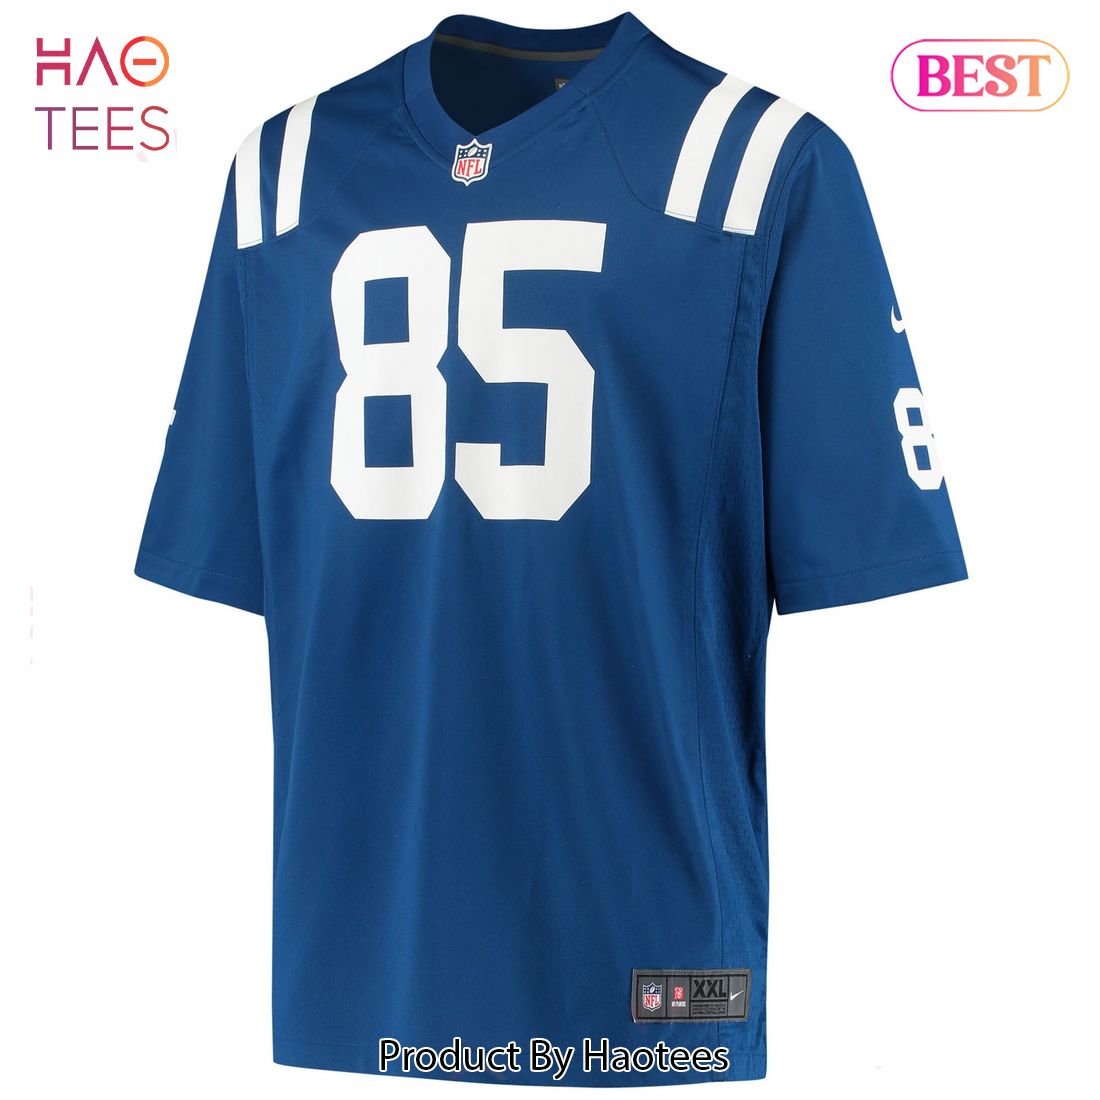 Eric Ebron Indianapolis Colts Nike Game Player Jersey Royal